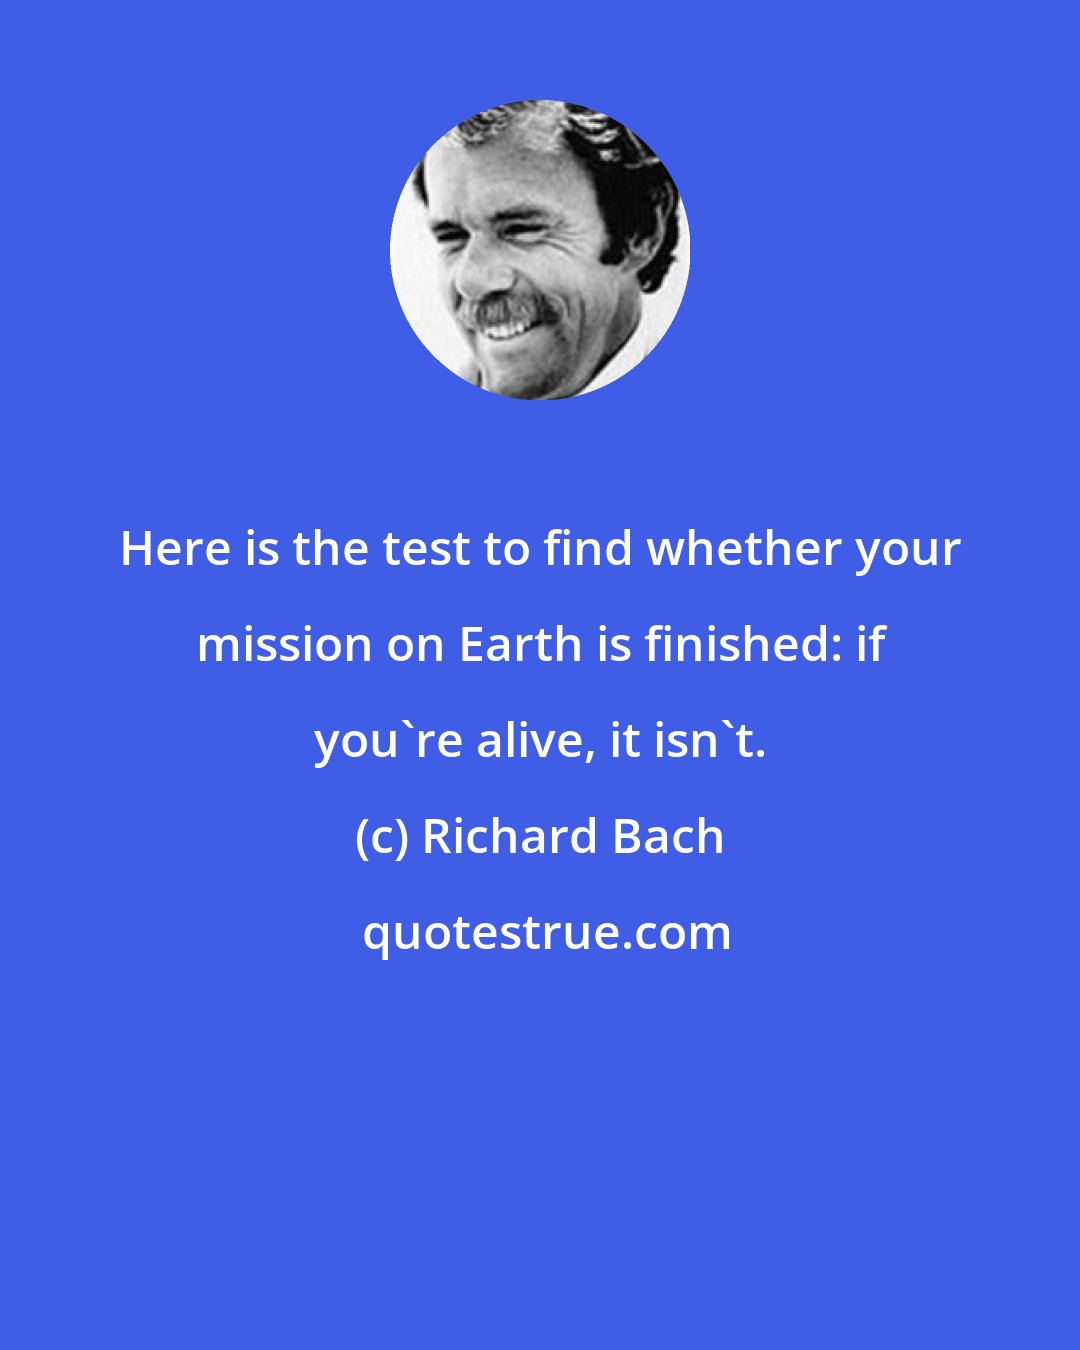 Richard Bach: Here is the test to find whether your mission on Earth is finished: if you're alive, it isn't.